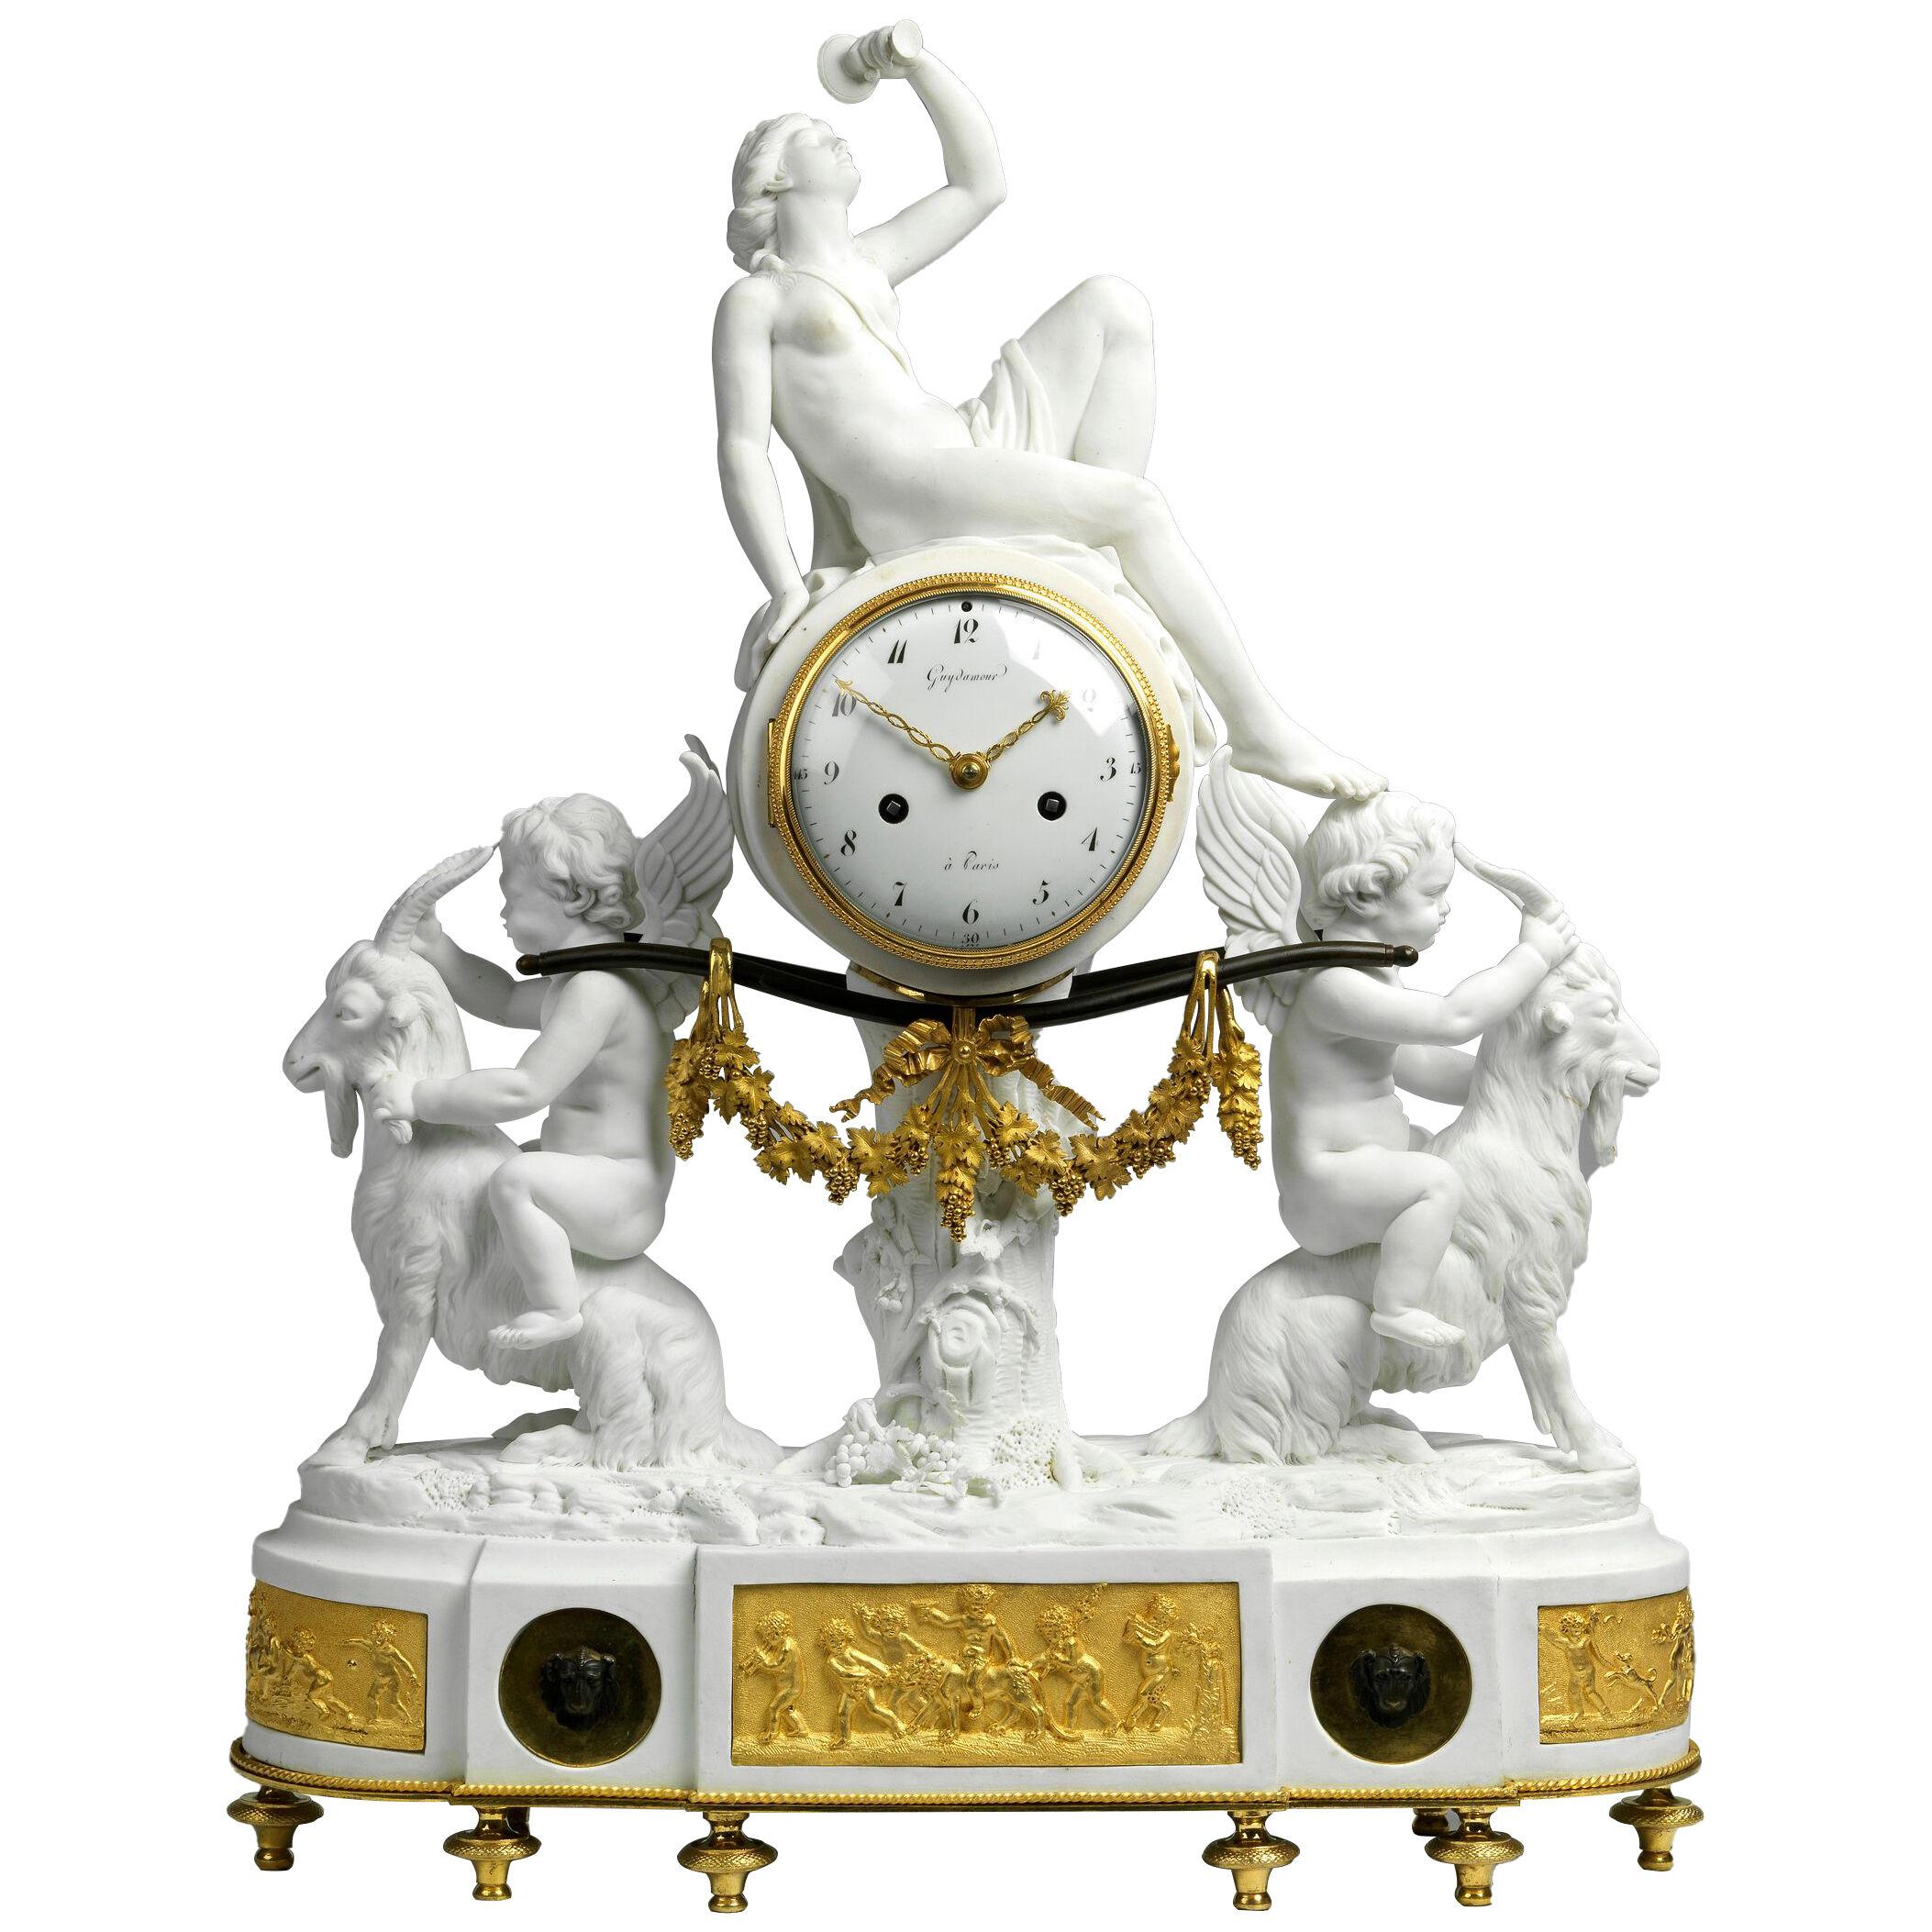 A Louis XVI Ormolu and Biscuit Porcelaine Mantel Clock by Guydamour